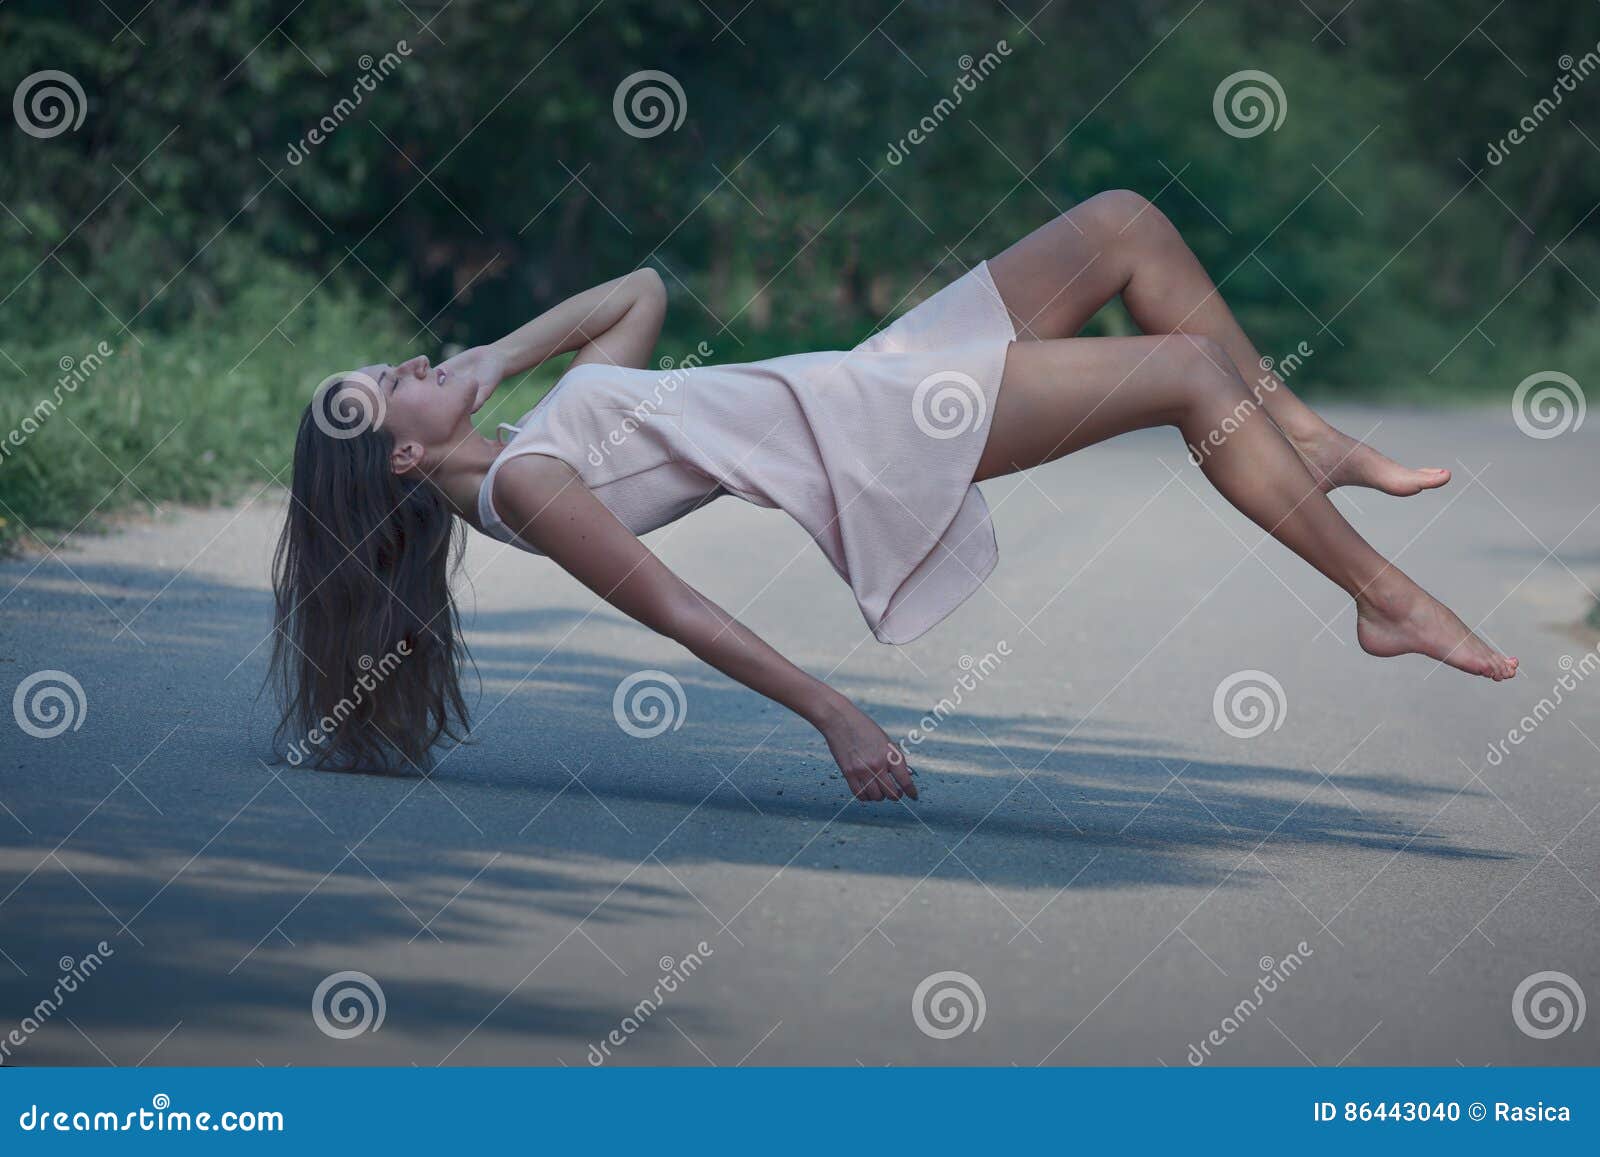 levitation portrait of young woman on the road